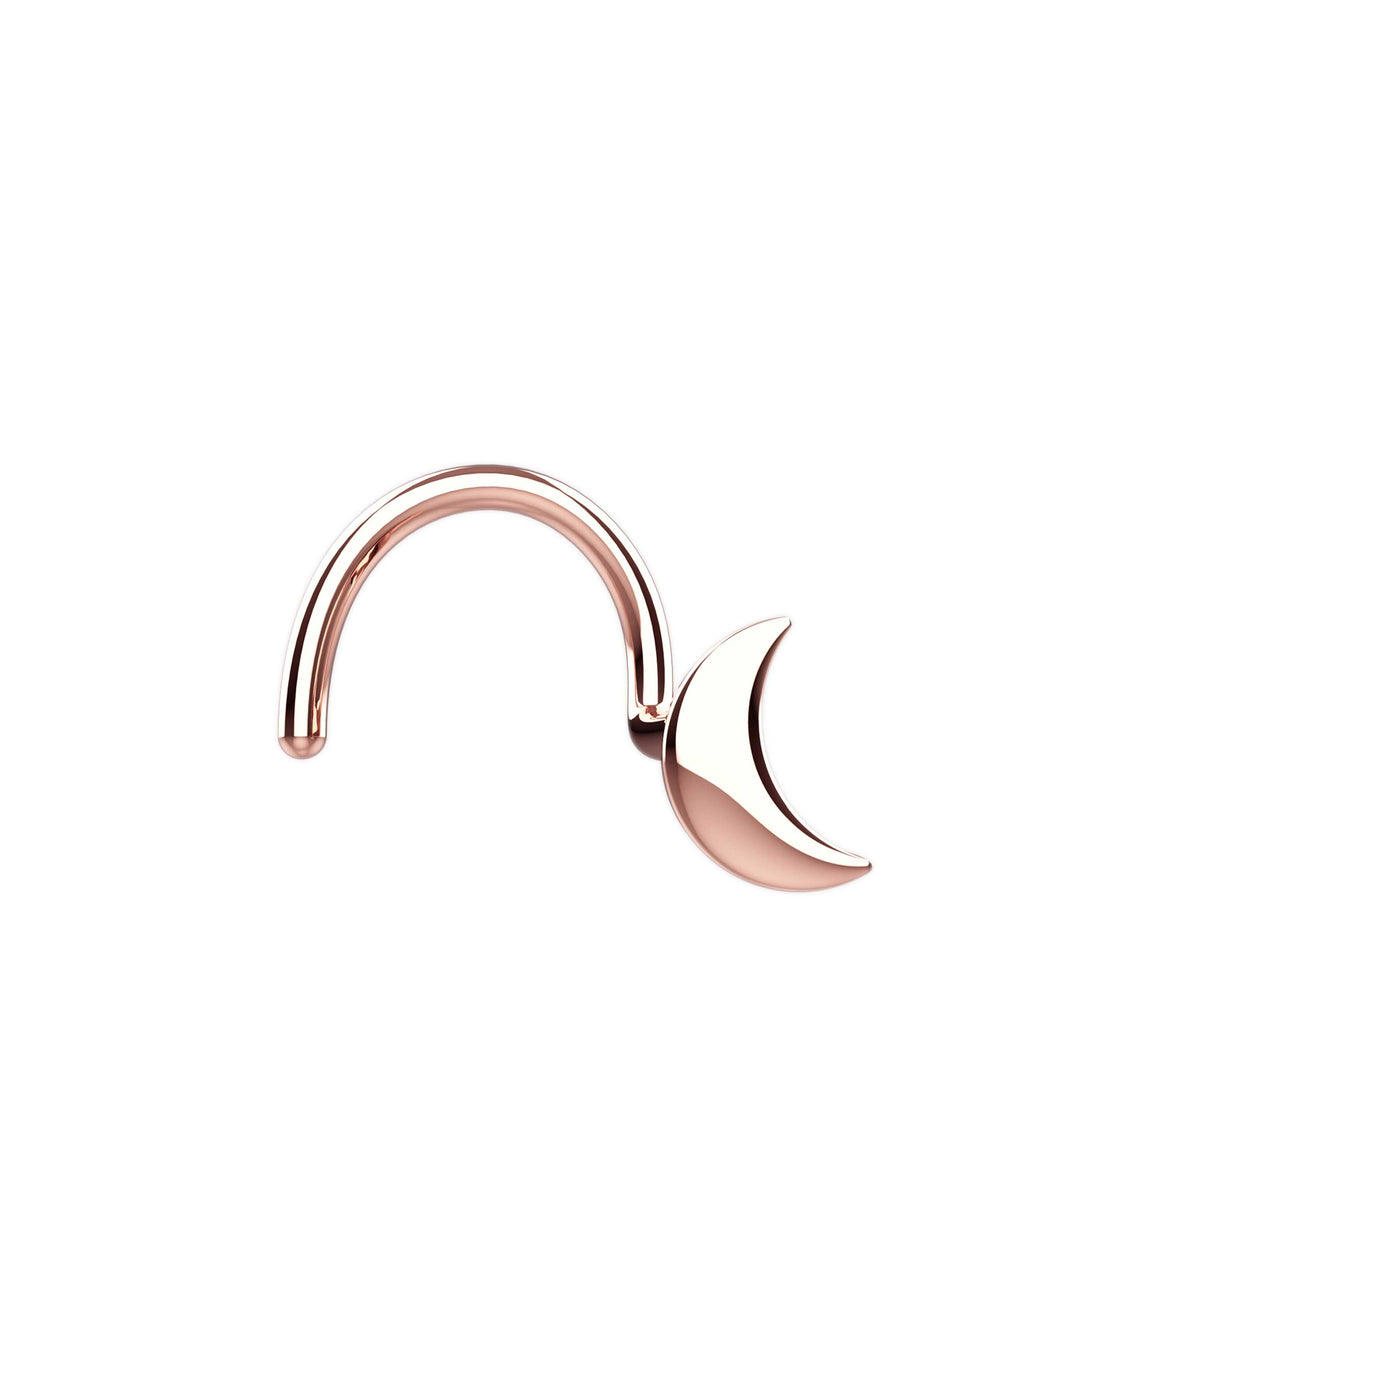 Tiny rose gold nose rings